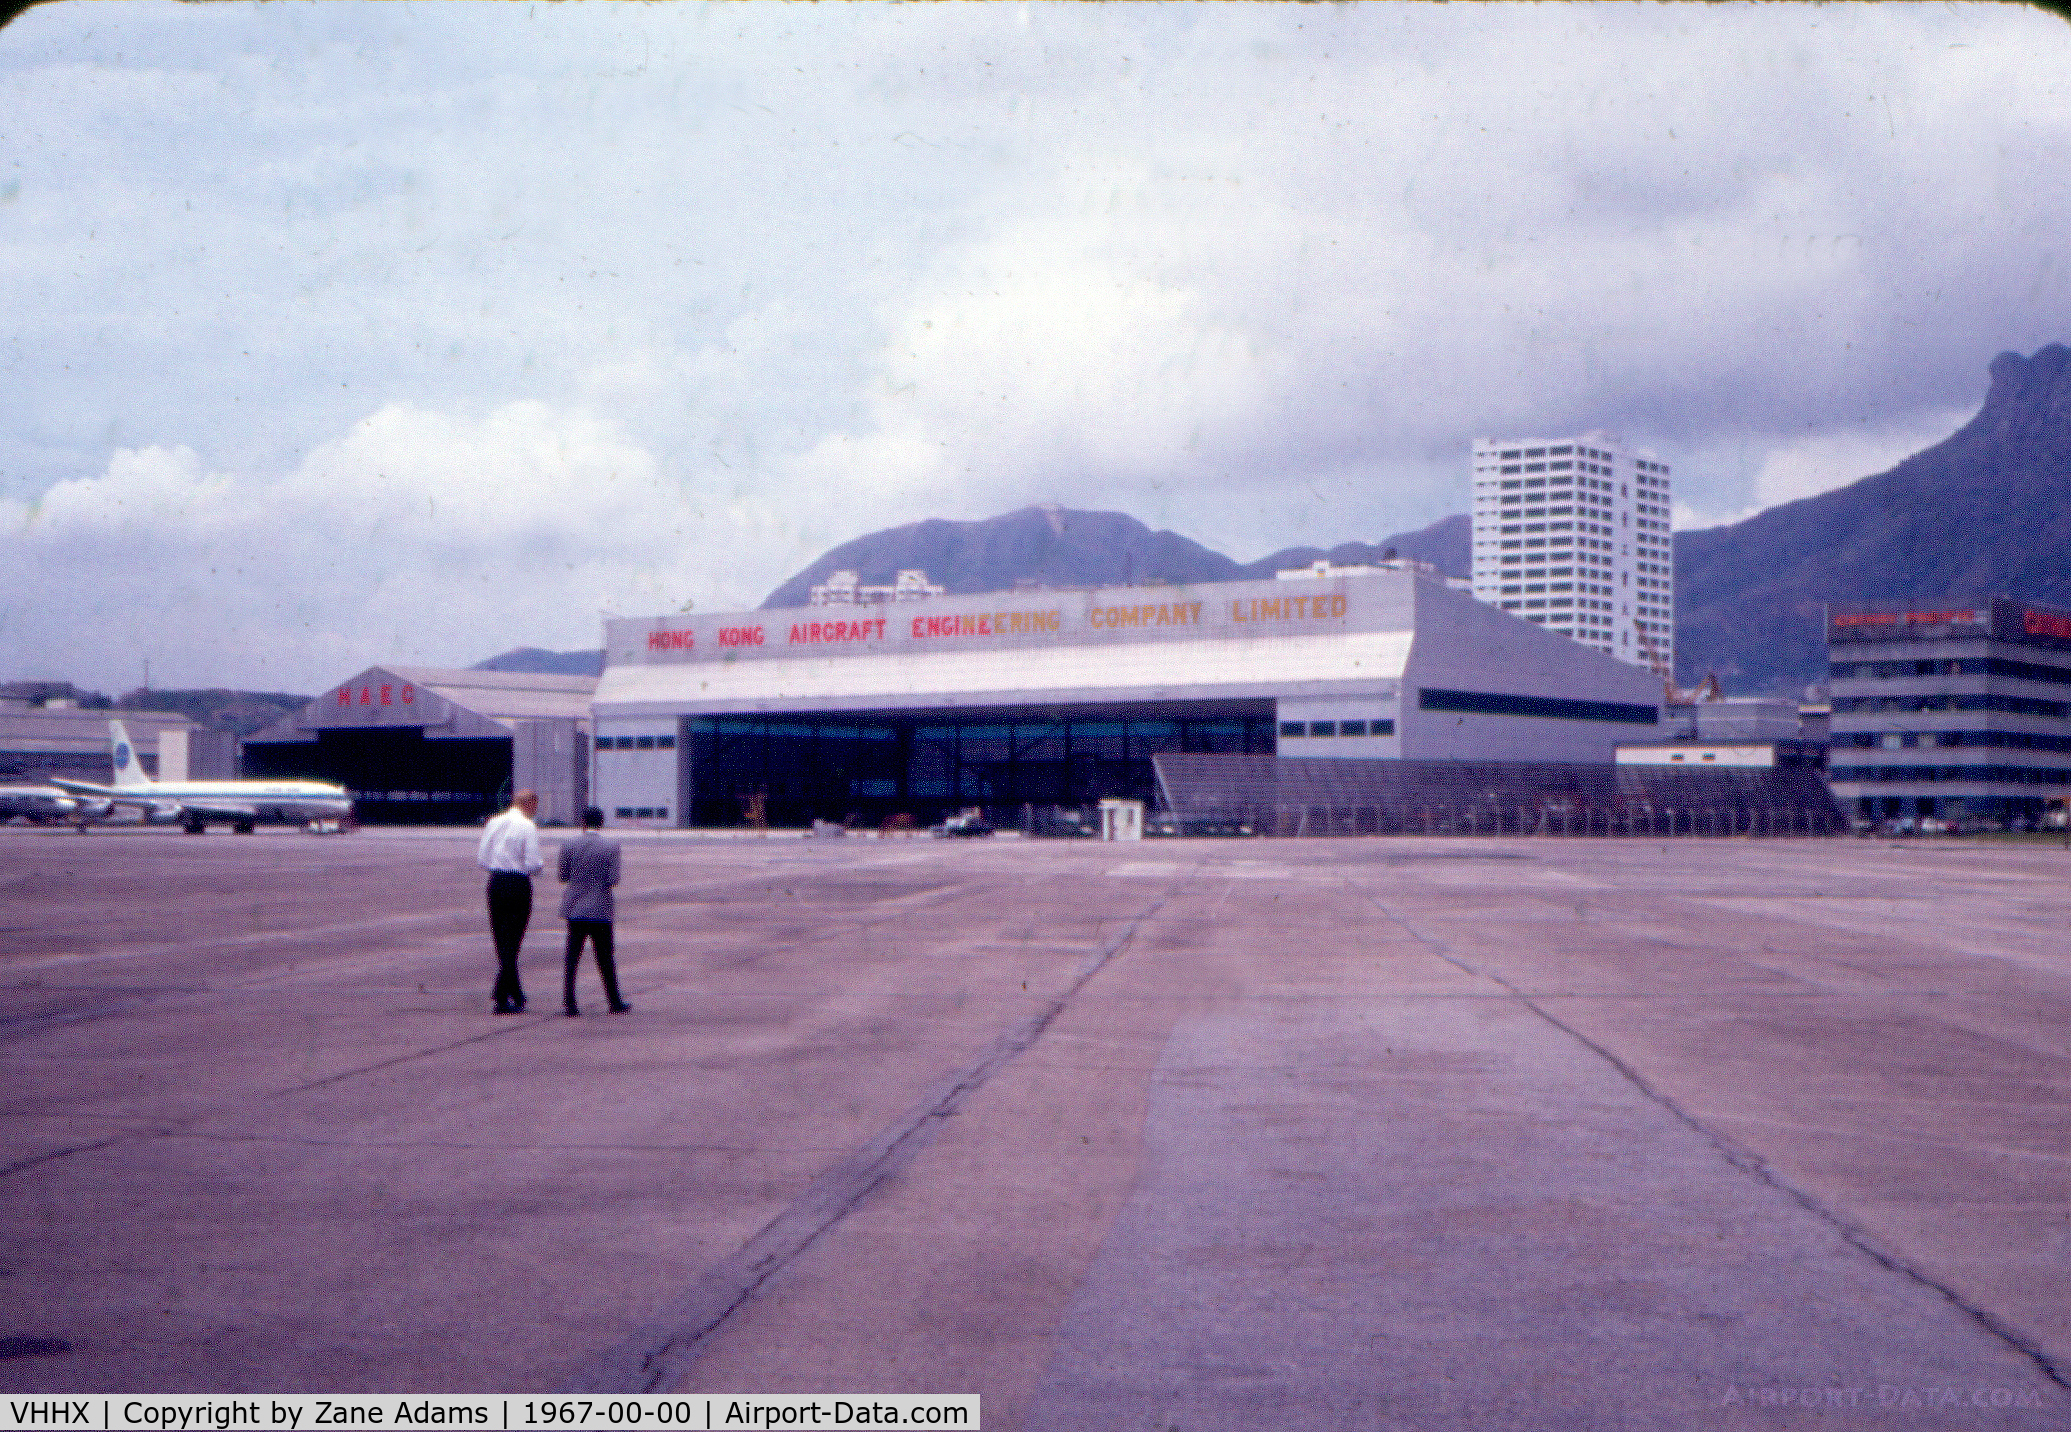 Kai Tak Airport (closed 1998), Kowloon Hong Kong (VHHX) - Photographed in Hong Kong - scanned from a 35mm slide bought at an estate sale